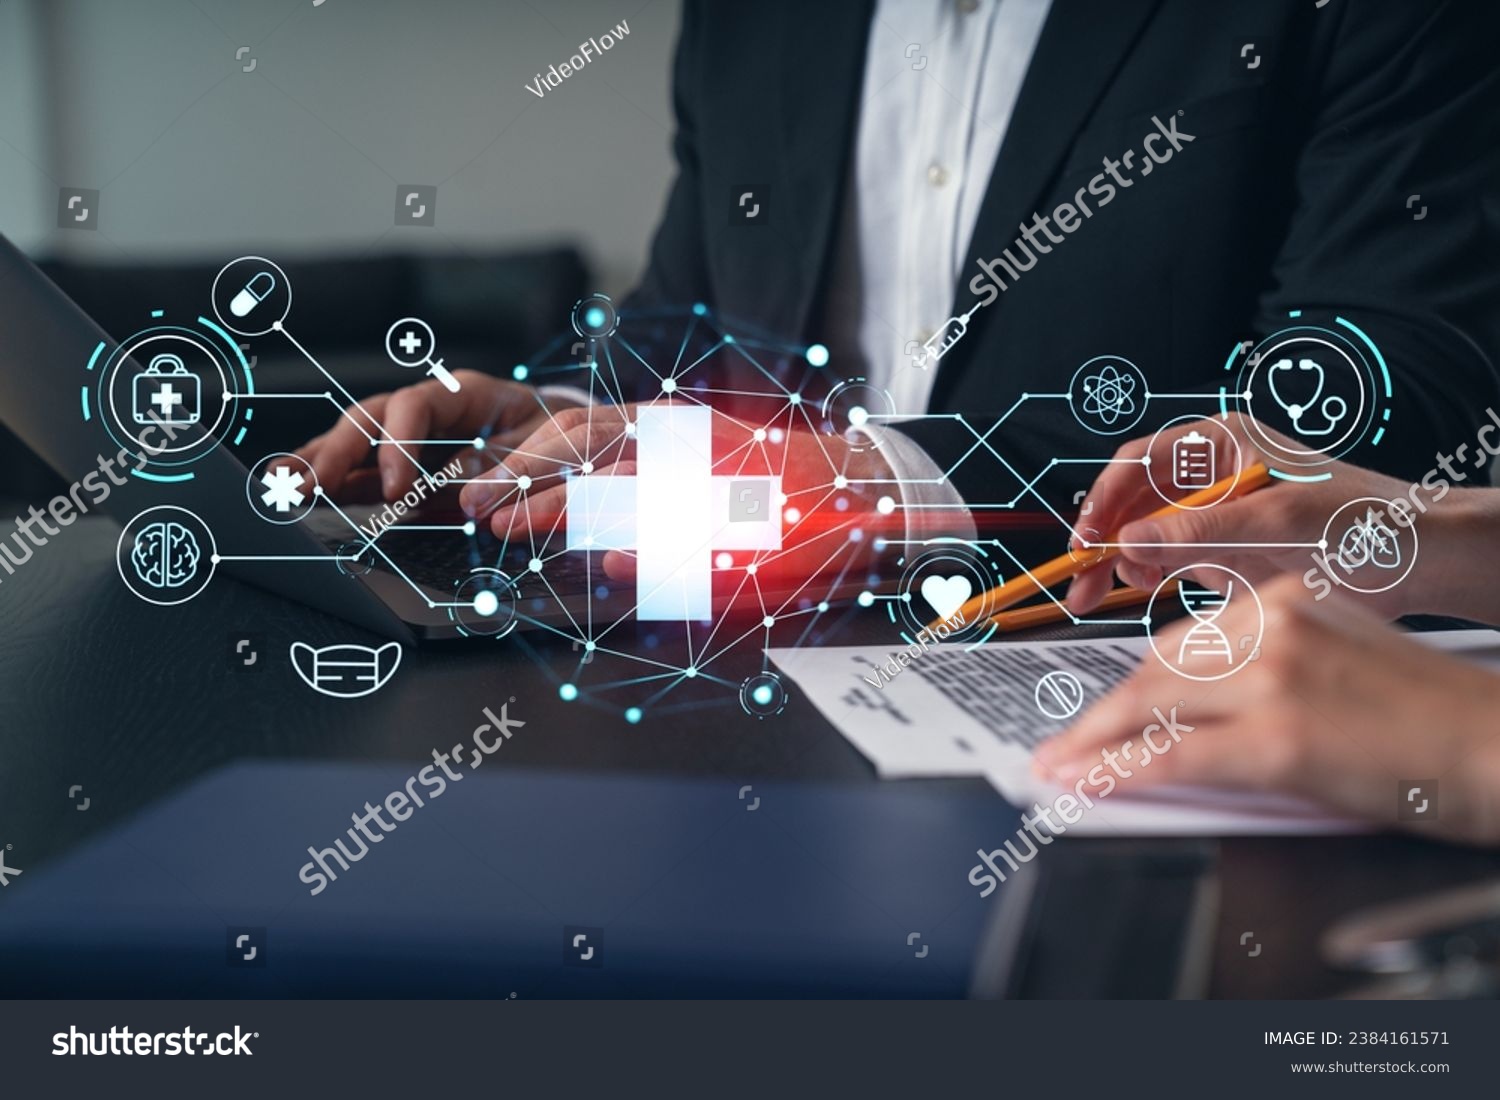 Businesspeople typing on laptop at office workplace. Concept of team work, business education, internet surfing, brainstorm, project information technology. Hands shot. Medical healthcare hologram #2384161571